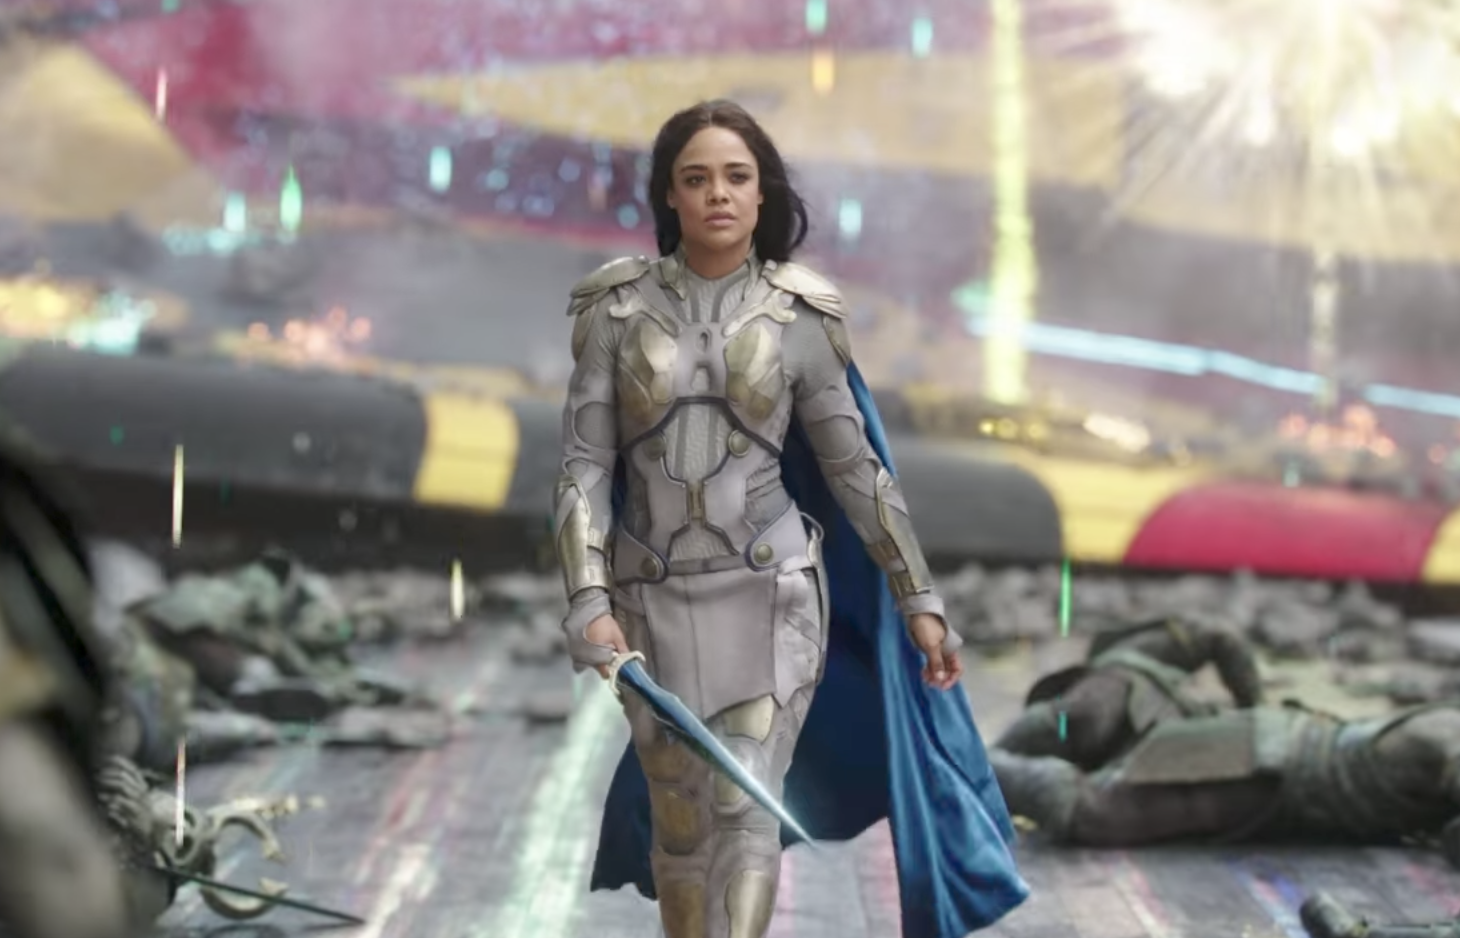 Valkyrie is seen walking away after fending off Hela's soldiers in Thor: Ragnarok (2017).